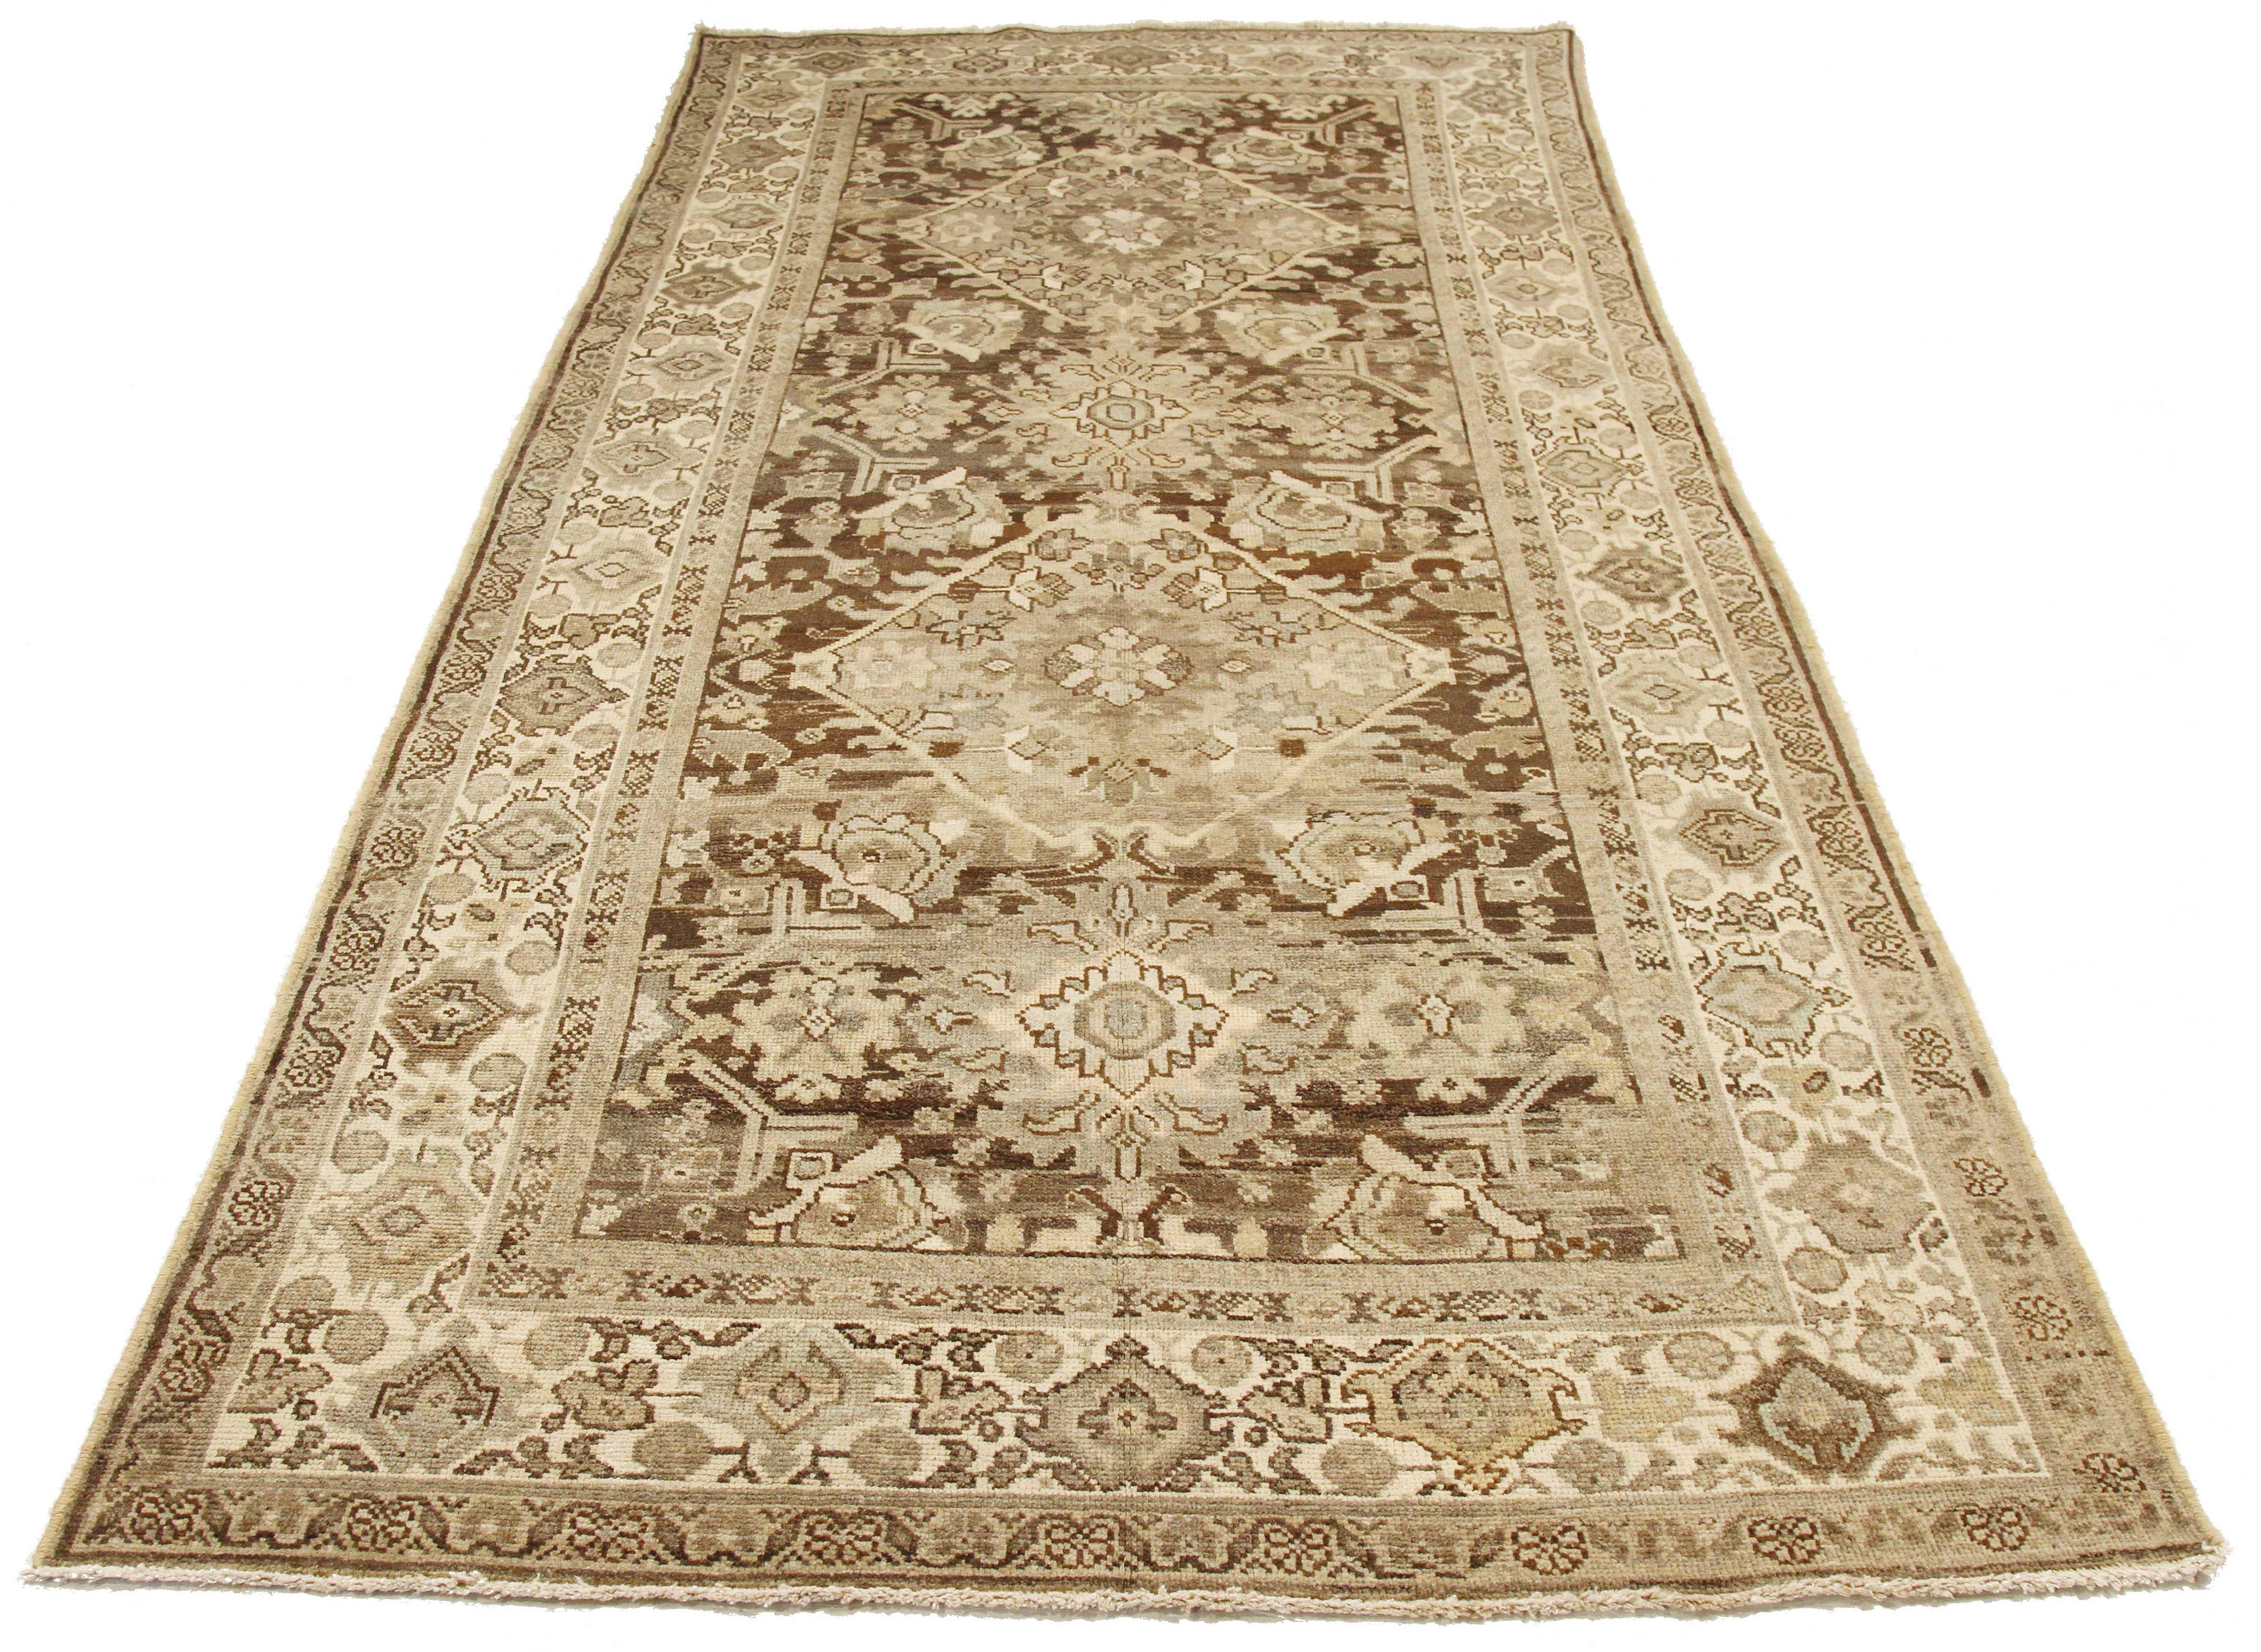 Antique Persian rug handwoven from the finest sheep’s wool and colored with all-natural vegetable dyes that are safe for humans and pets. It’s a traditional Mahal design featuring botanical details in ivory and brown. It’s a lovely piece to showcase